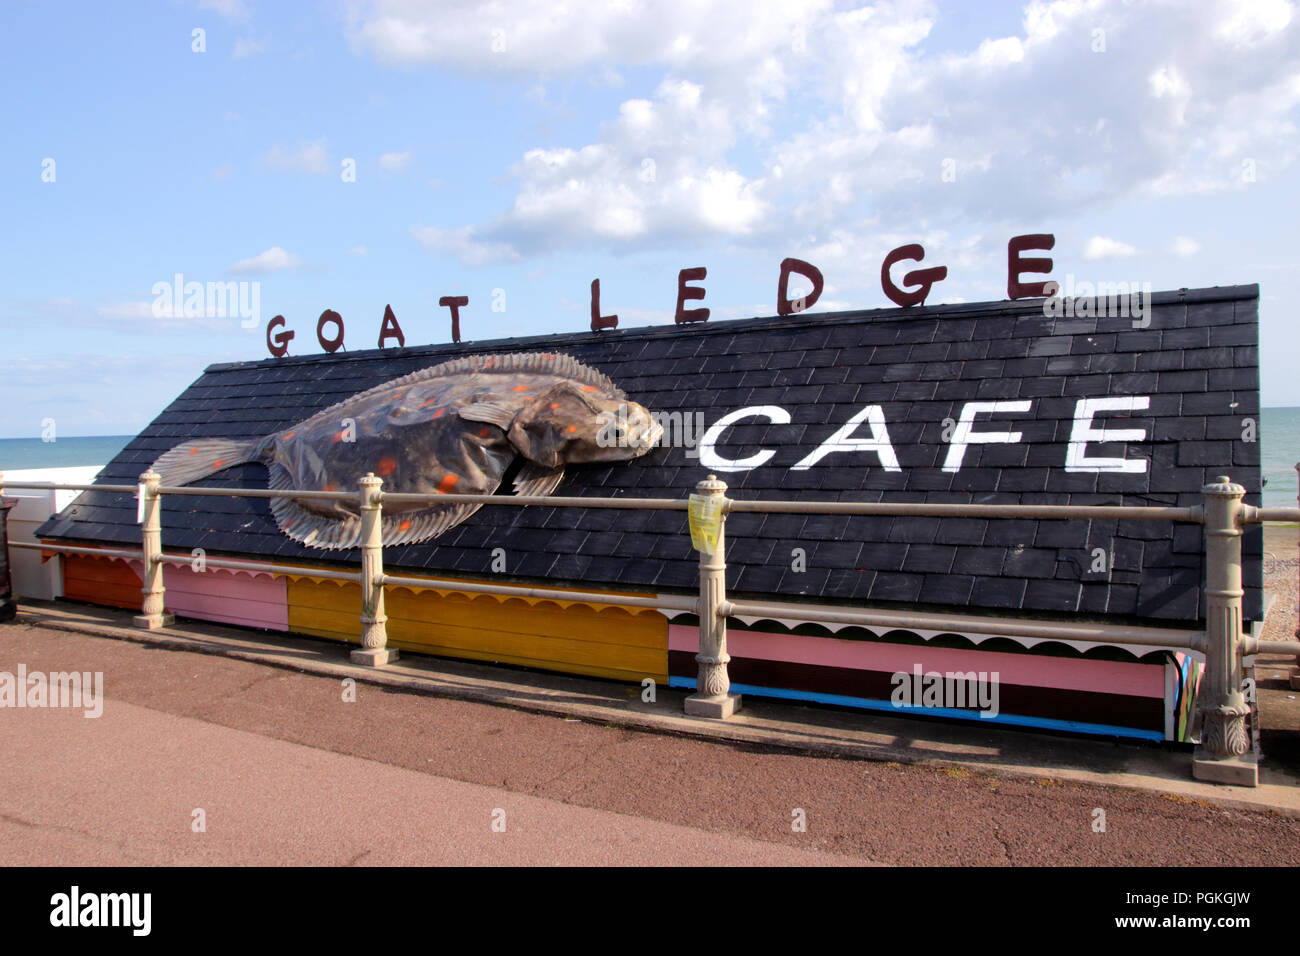 Goat Ledge cafe on Hastings seafront promanade East Sussex UK Stock Photo